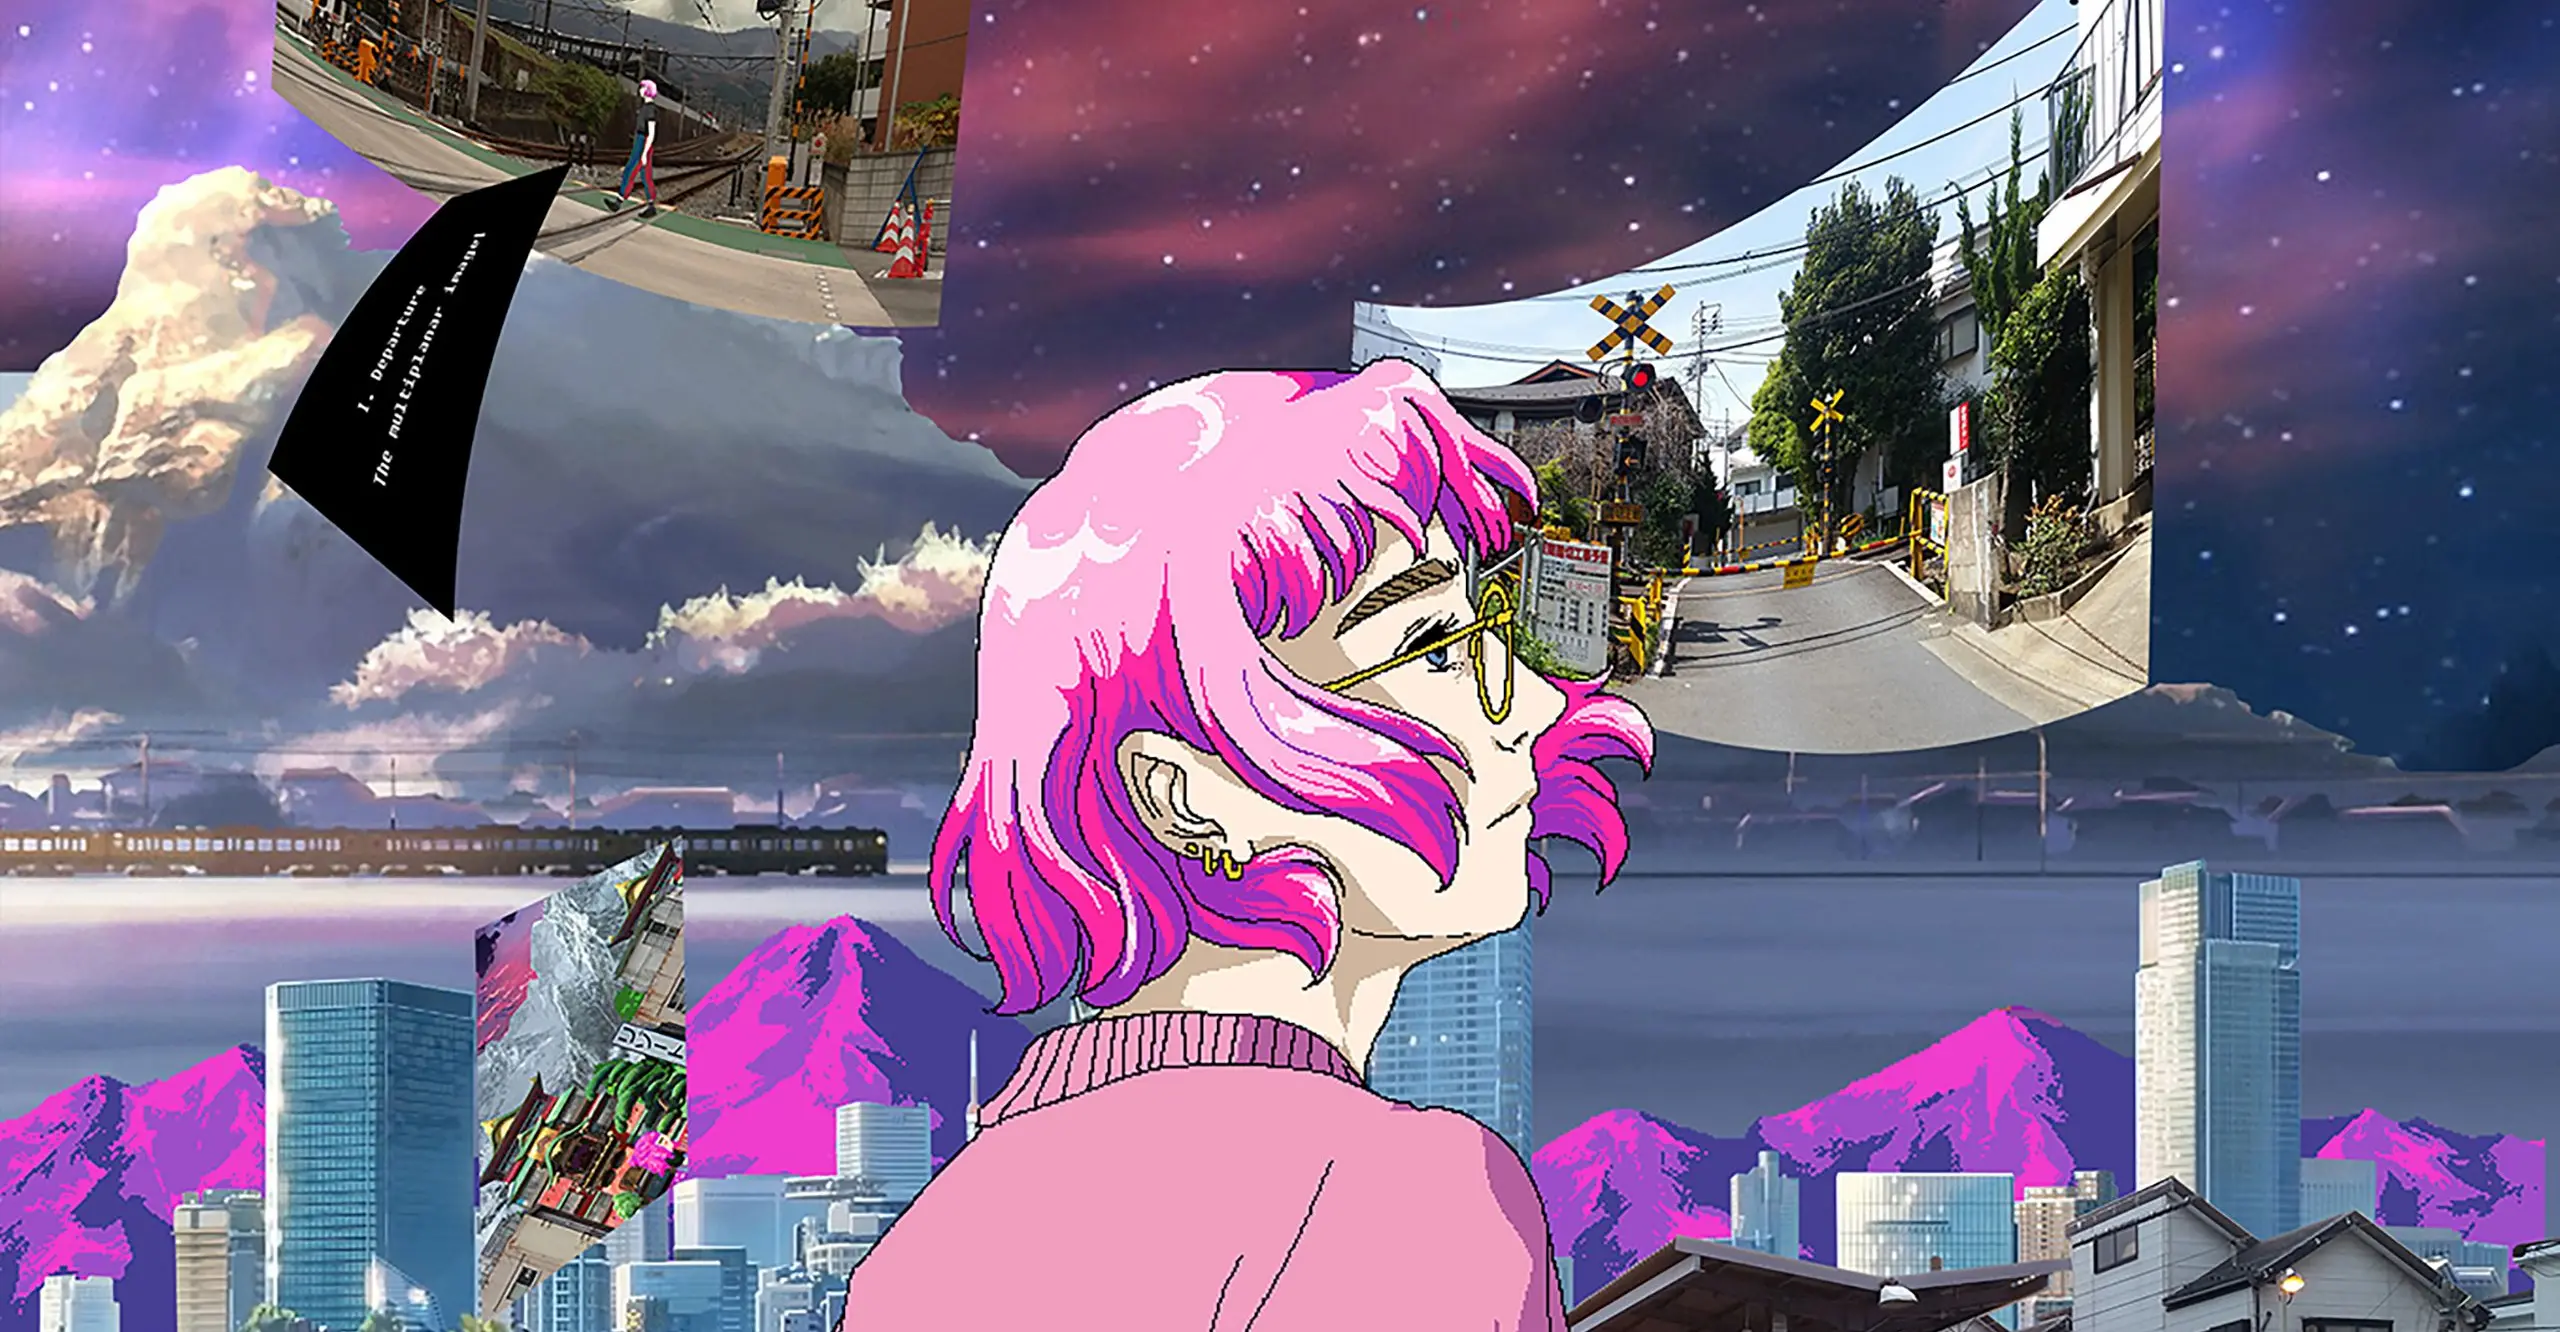 An anime illustration of a person with pink hair and yellow glasses looking at screen captures of Google Street view